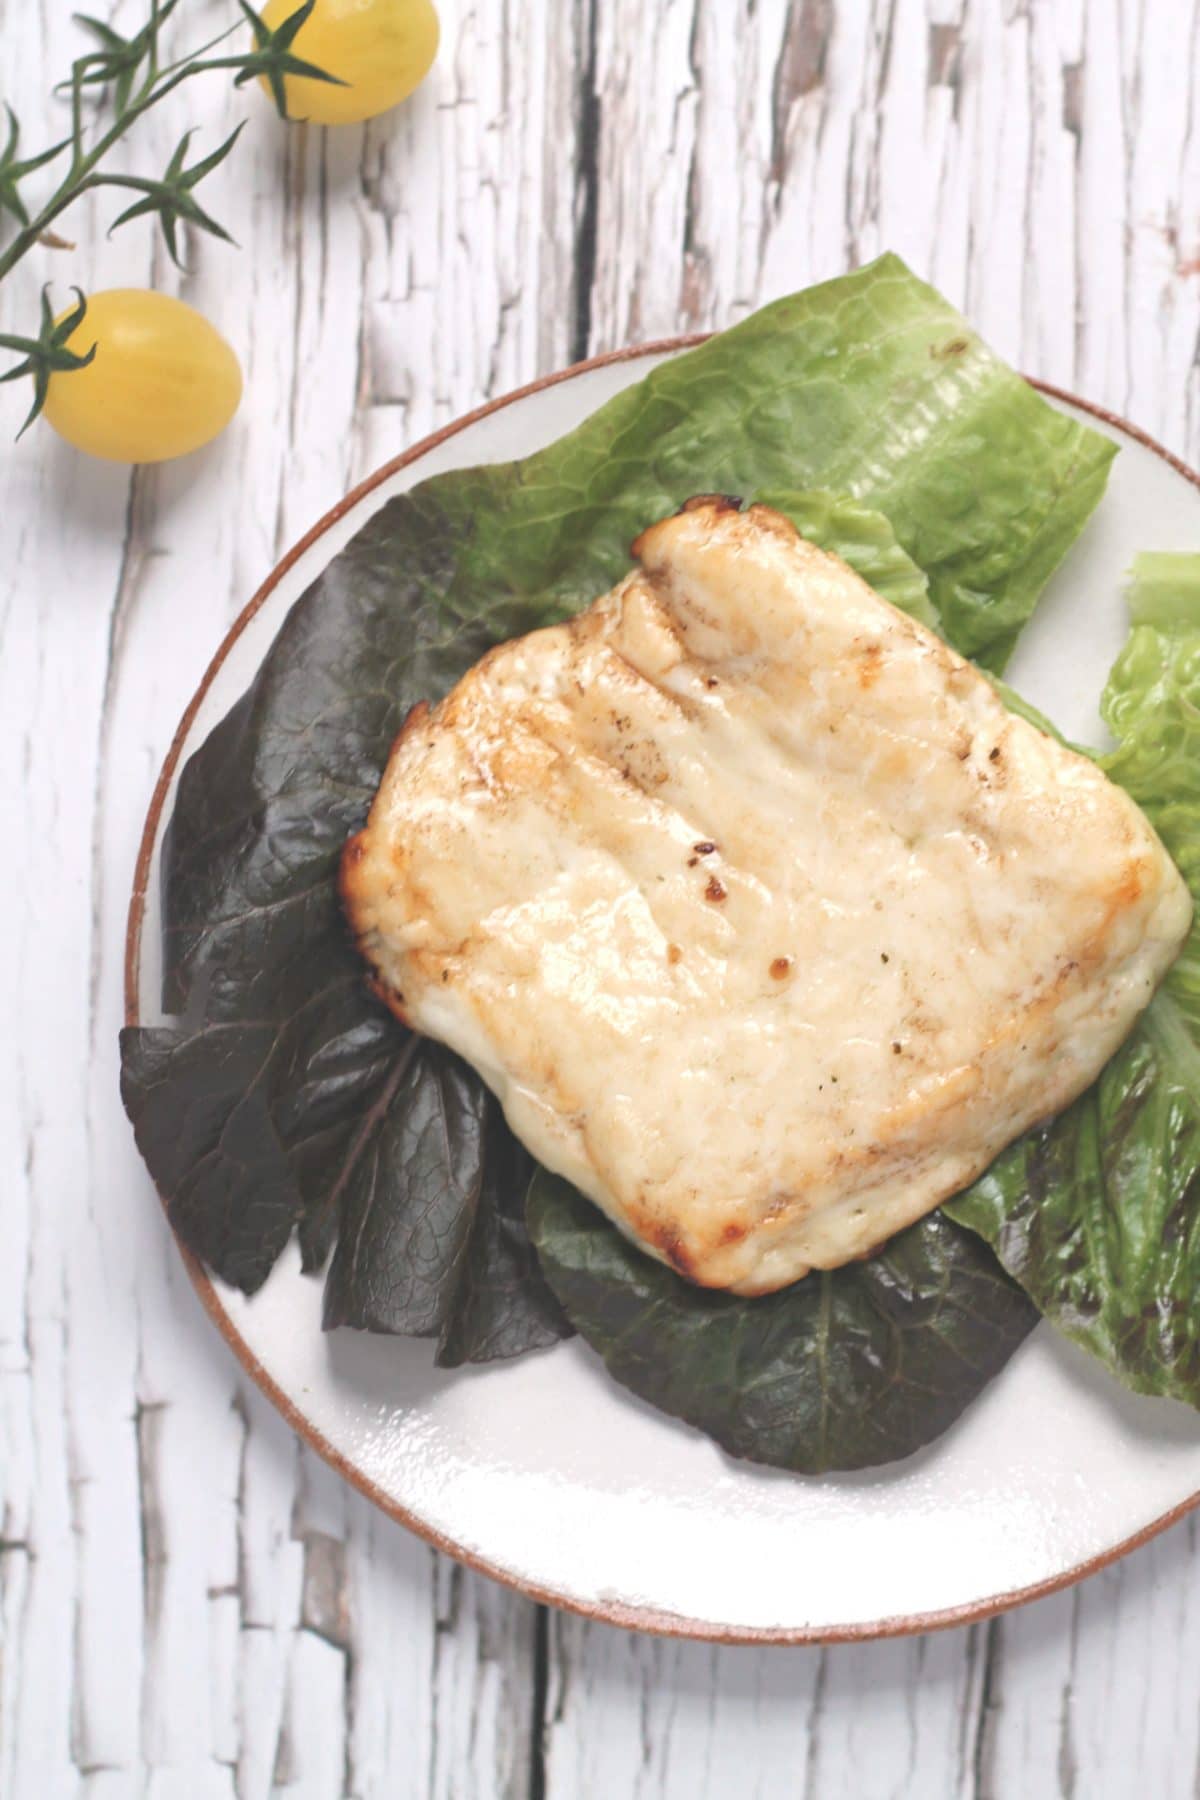 A slab of balsamic baked halloumi on a bed of lettuce leaves